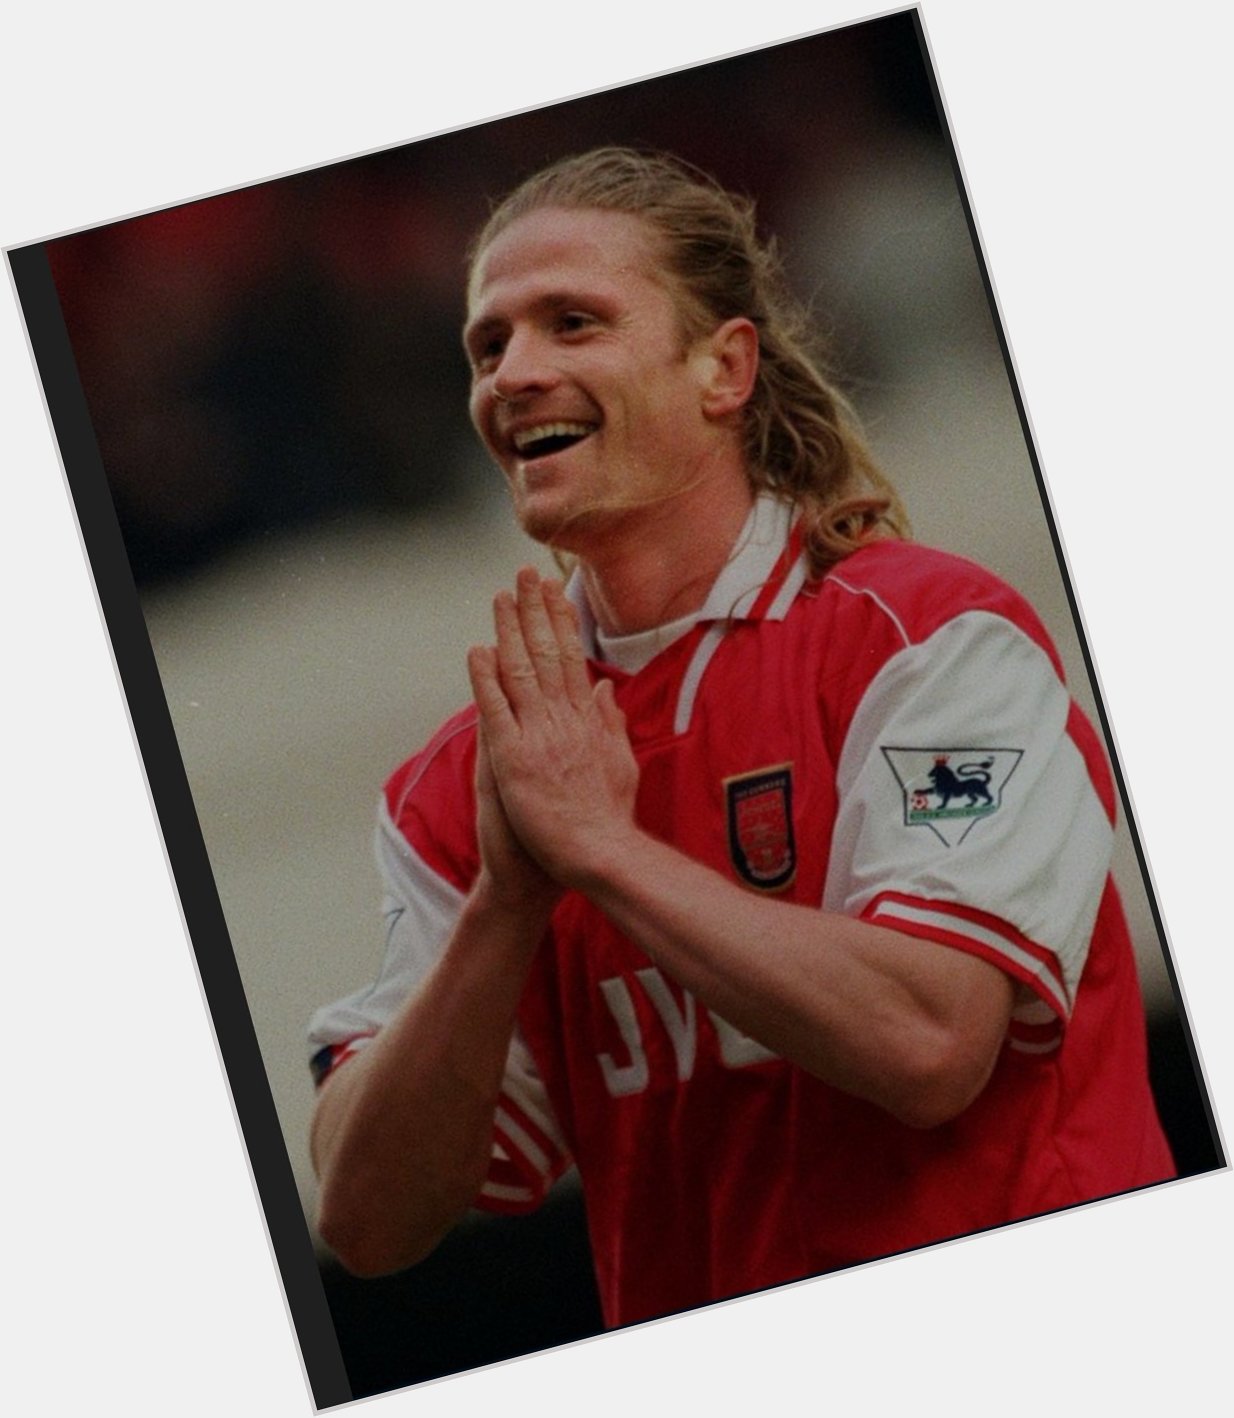 A very happy birthday to this legend Emmanuel Petit   